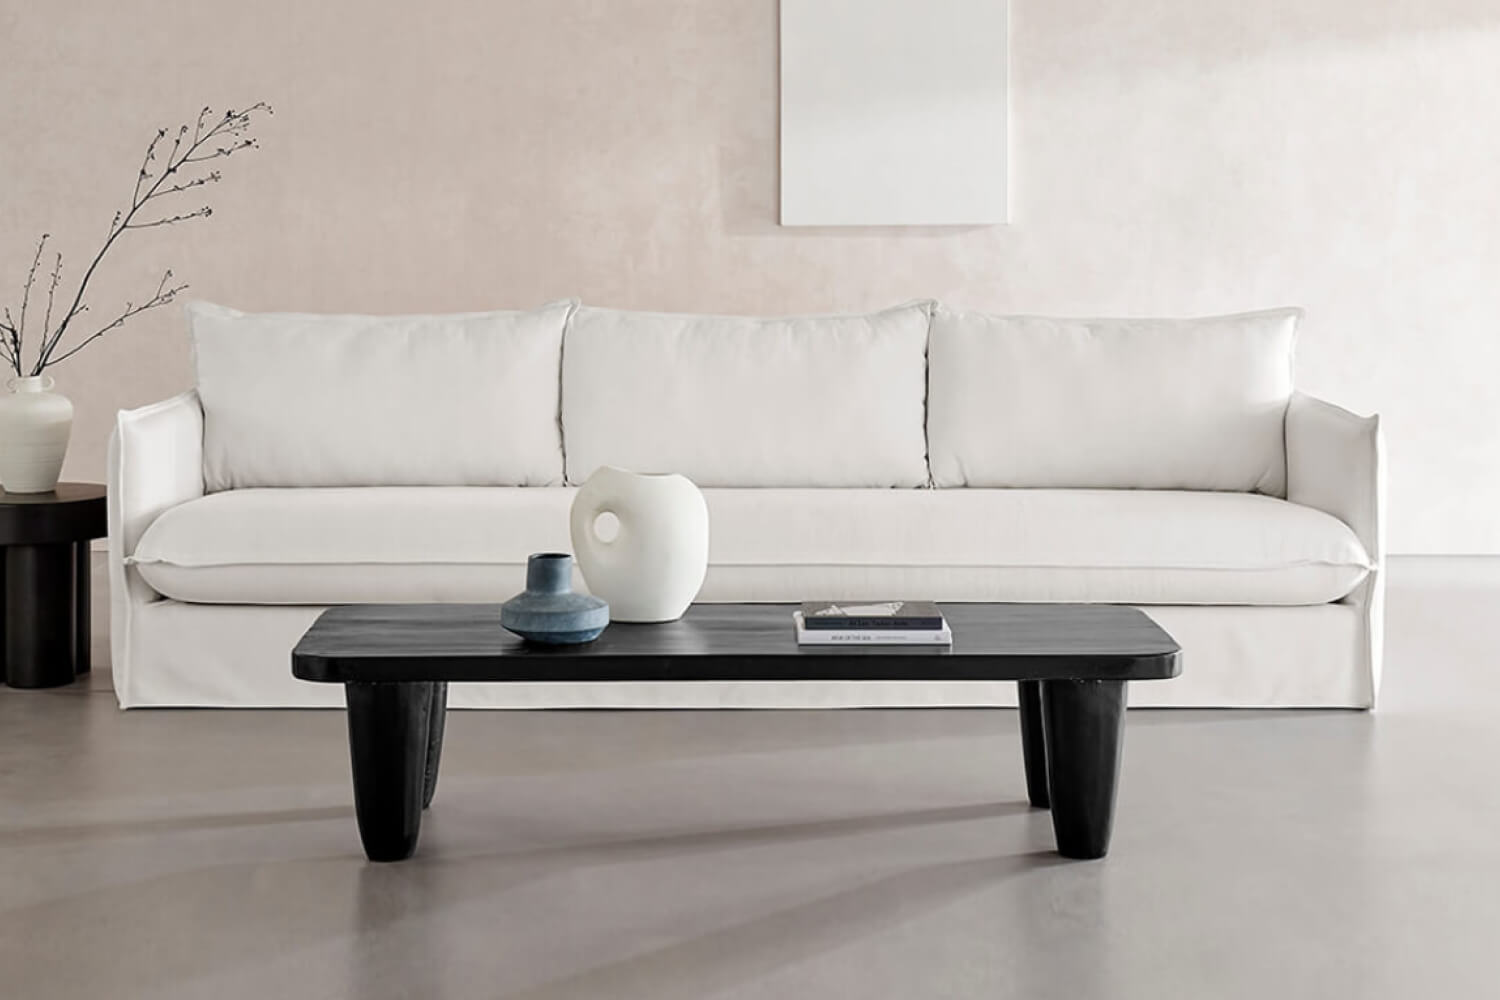 A minimalist living room with a sleek, white sofa adorned with three matching cushions. In the foreground, an EM Wabisabi Rustic Rectangular Black Reclaimed Wood Coffee Table holds a simple white vase and a book. 